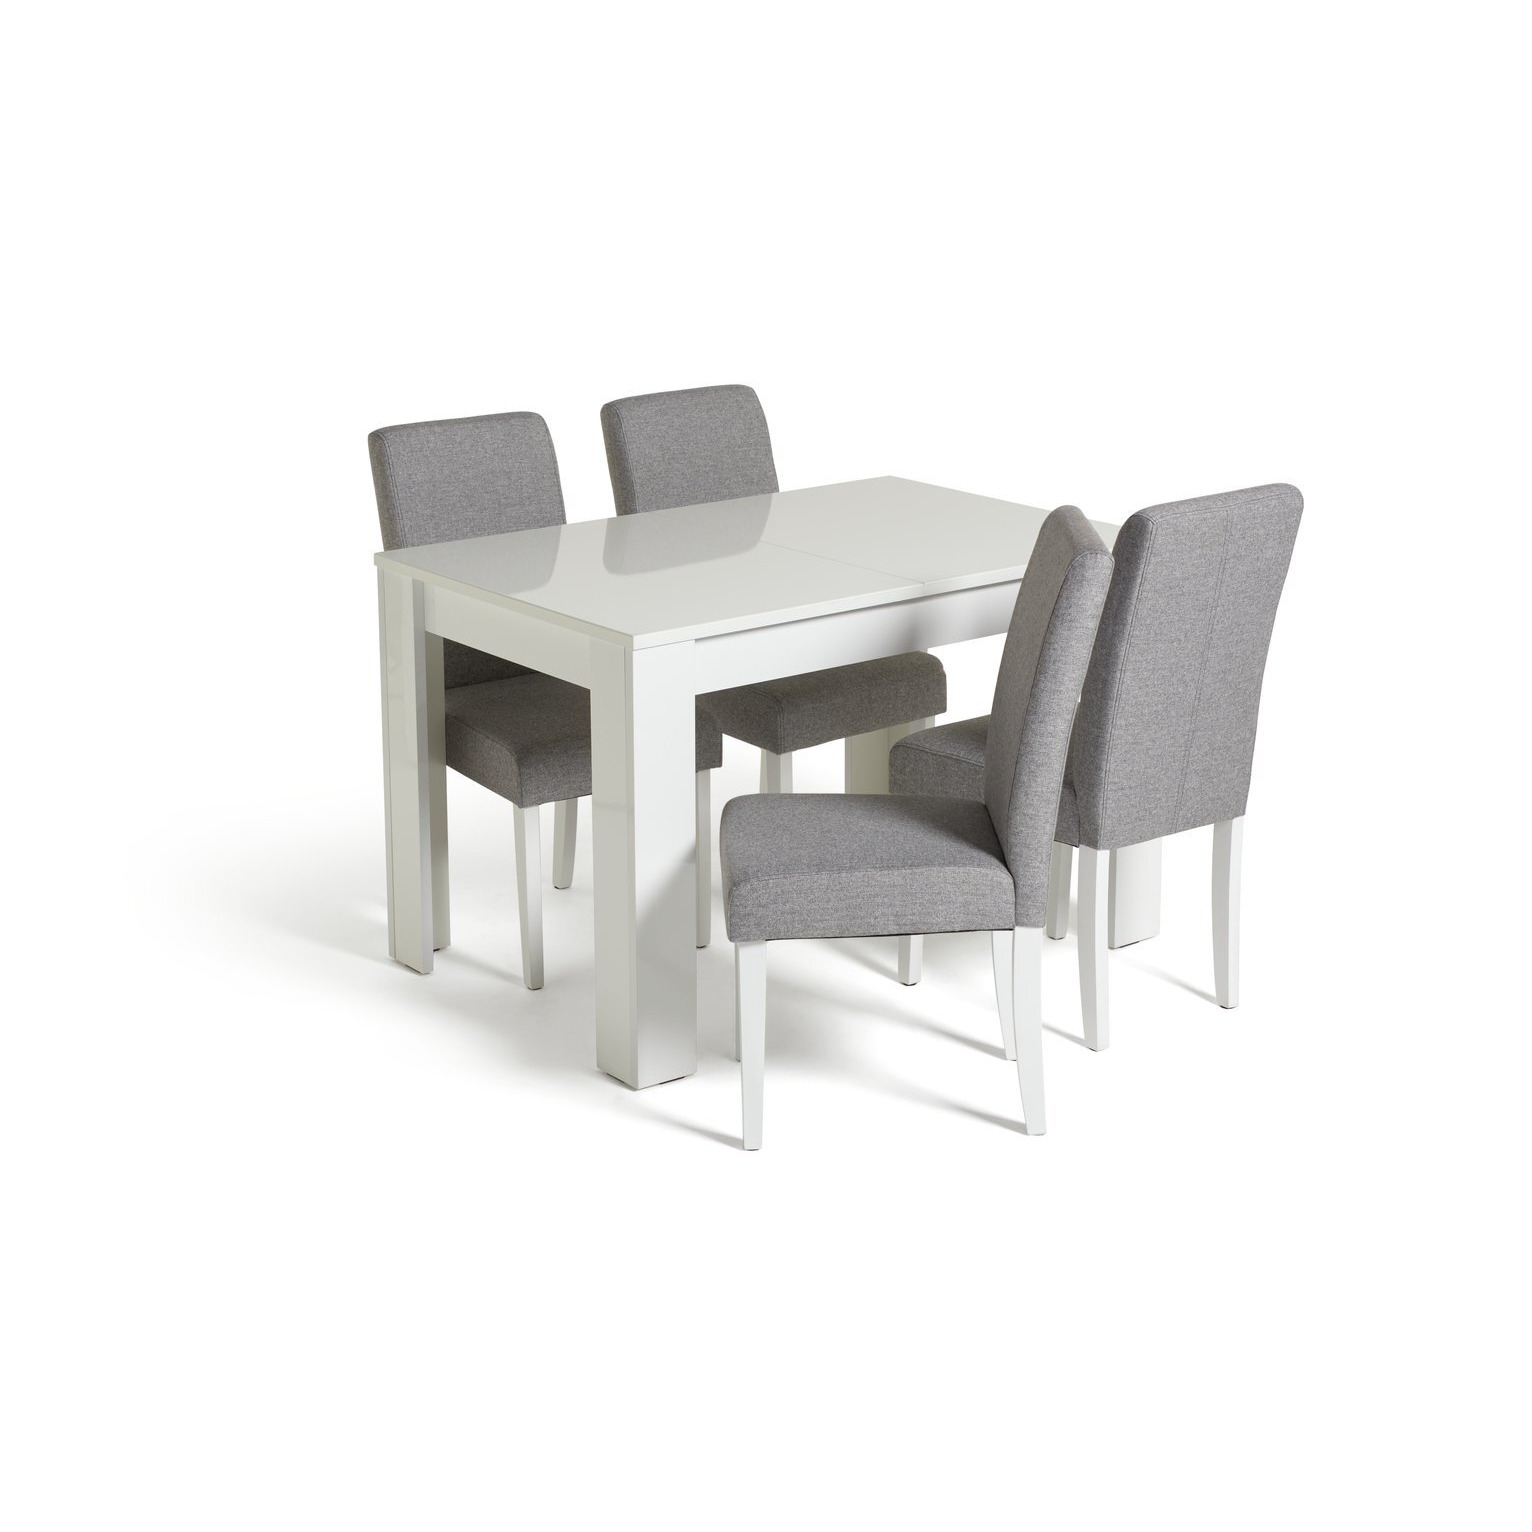 Argos Home Miami Gloss Extending Table & 4 Tweed Chair -Grey - image 1